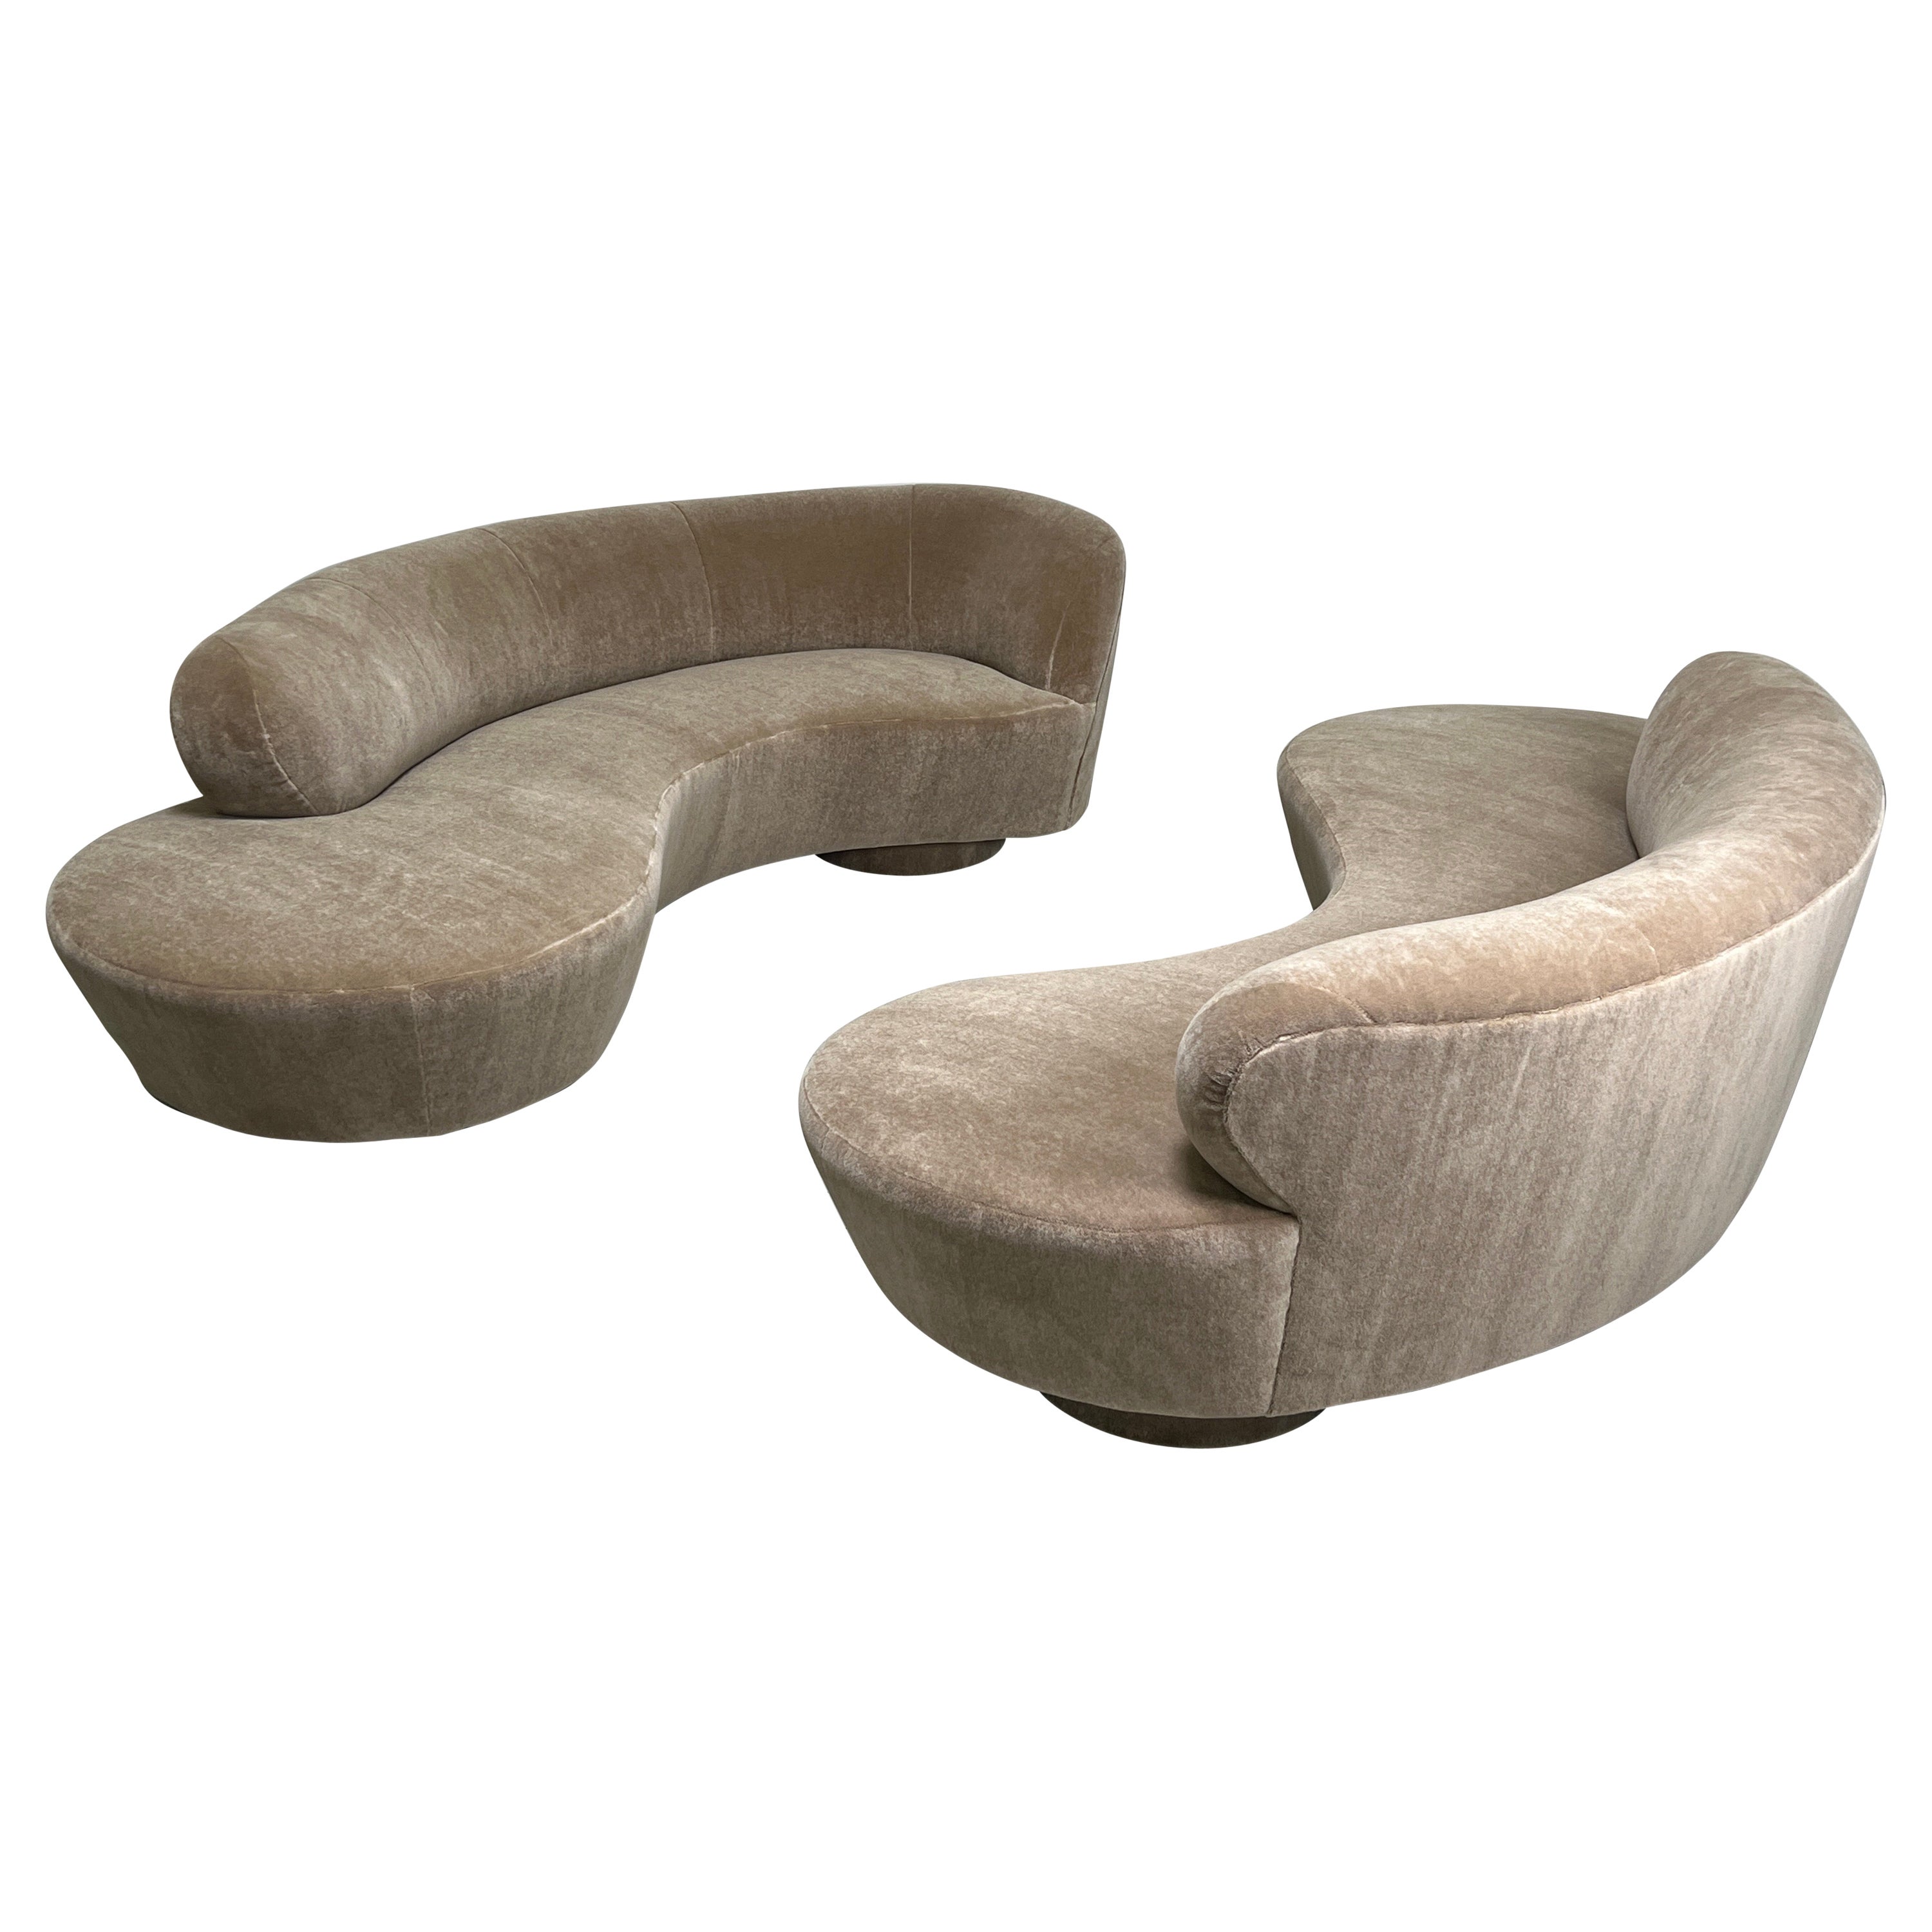 Pair of Sofas by Vladimir Kagan for Directional